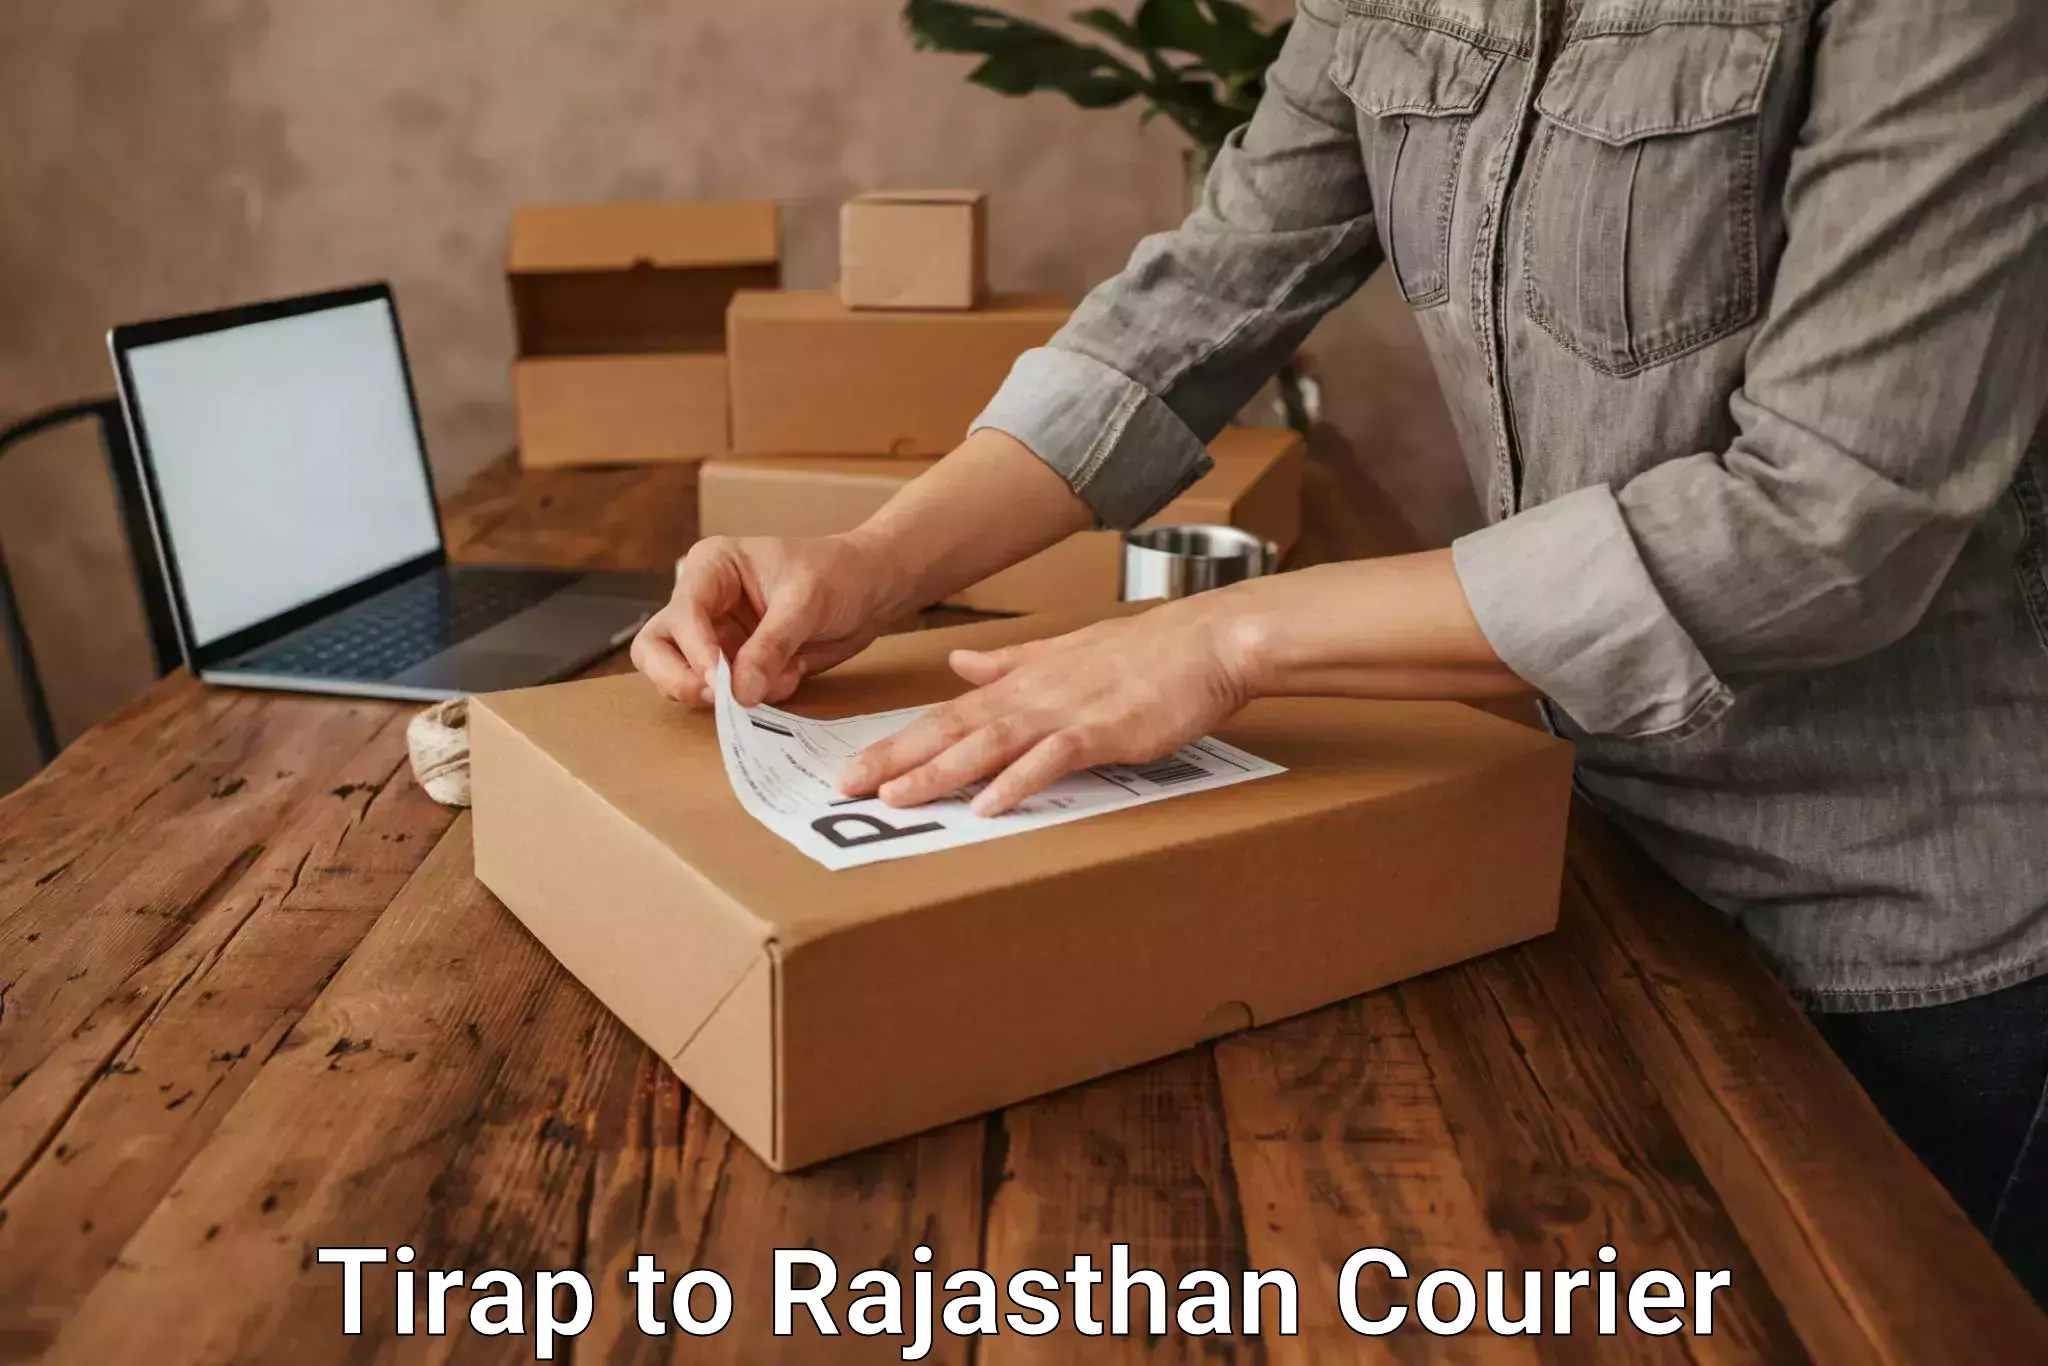 Professional courier handling Tirap to Rajasthan